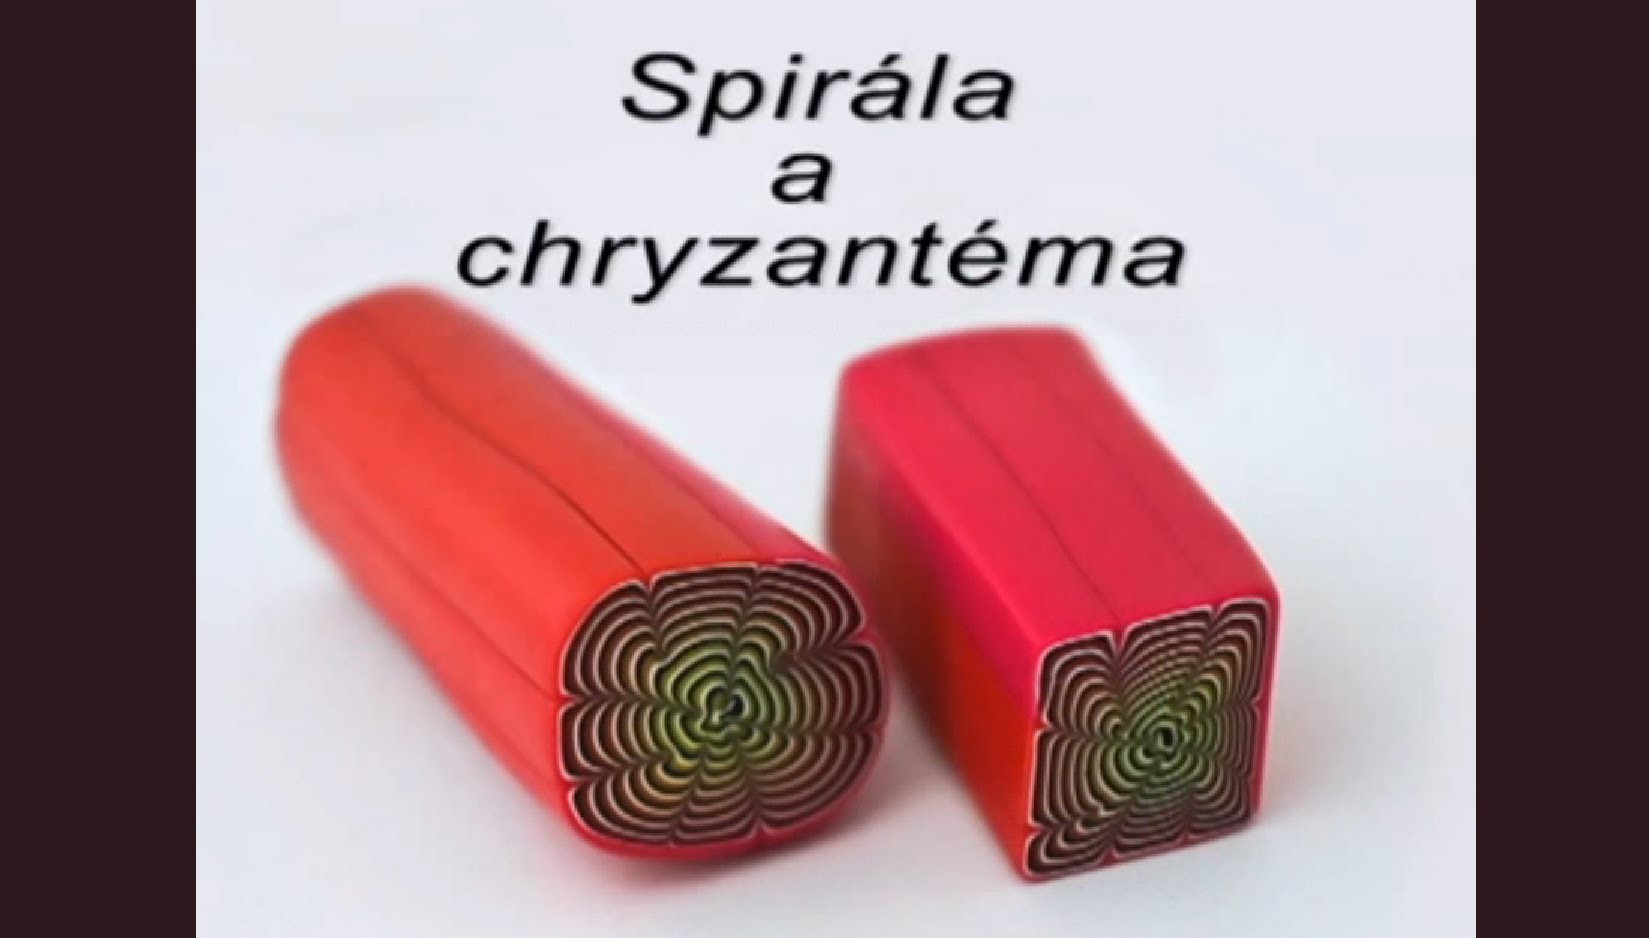 Jelly roll (Spiral) and Chrysanthemum cane